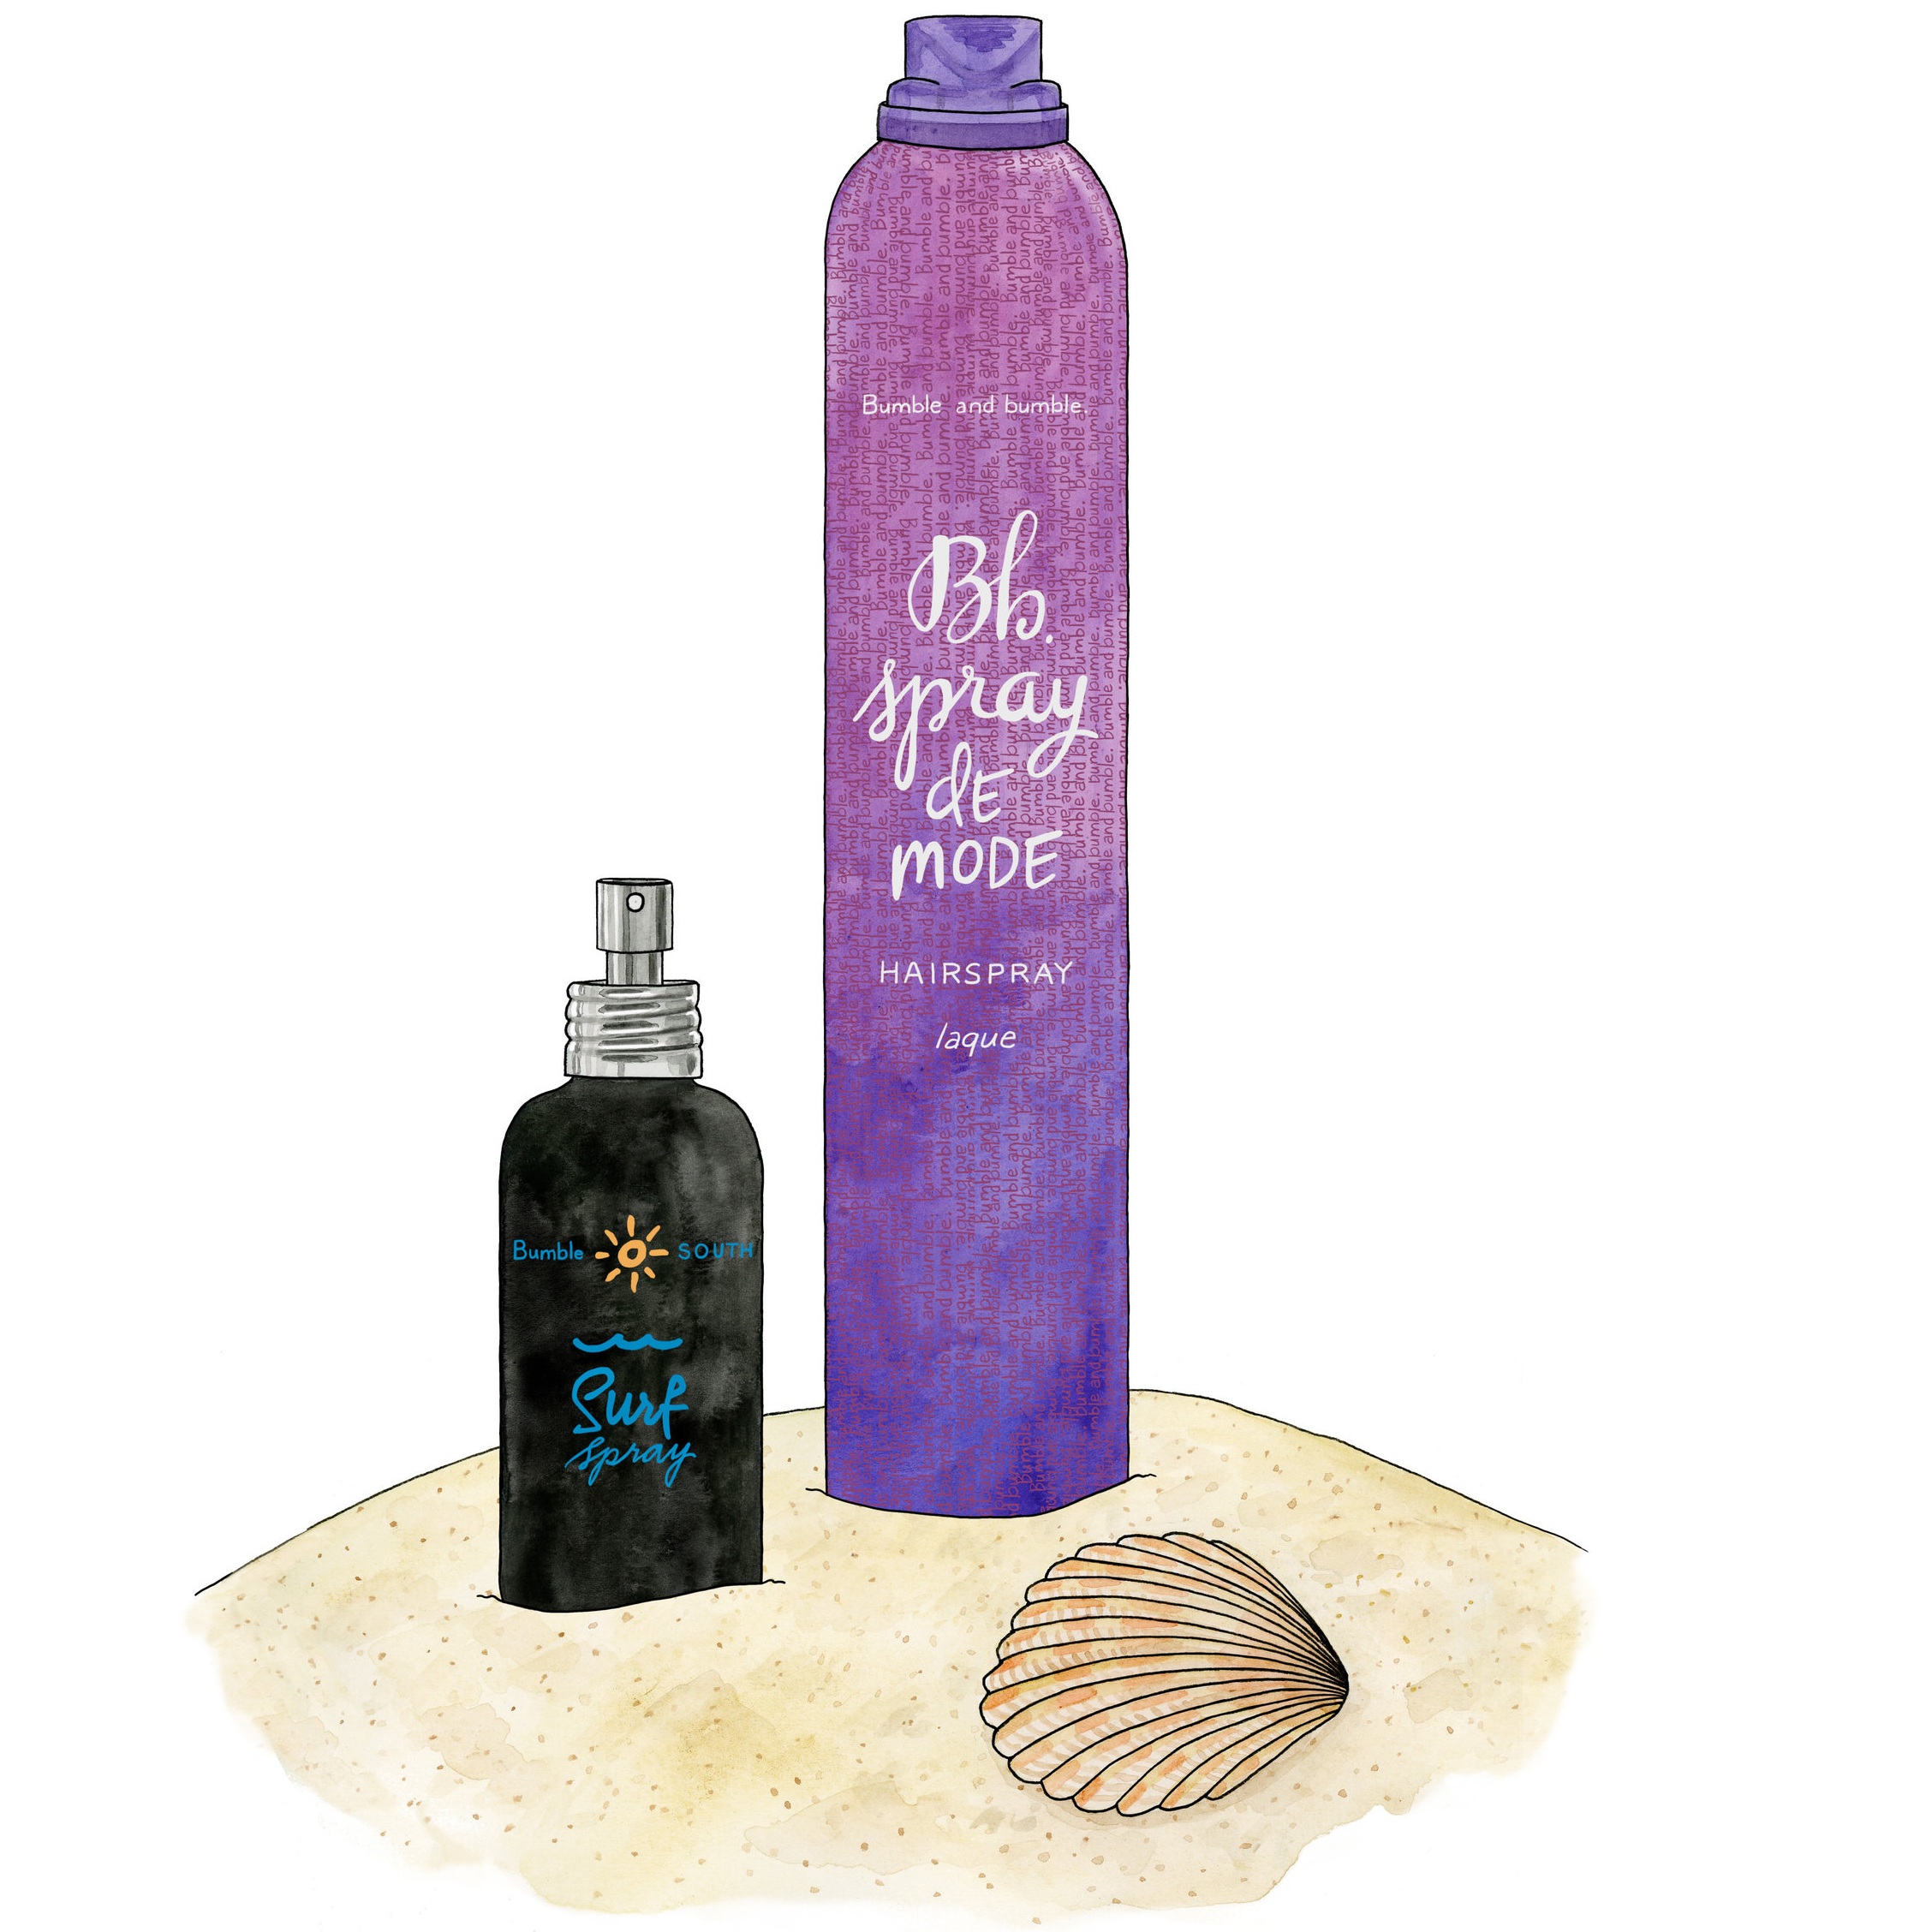 Bumble and bumble: Surf Spray 3